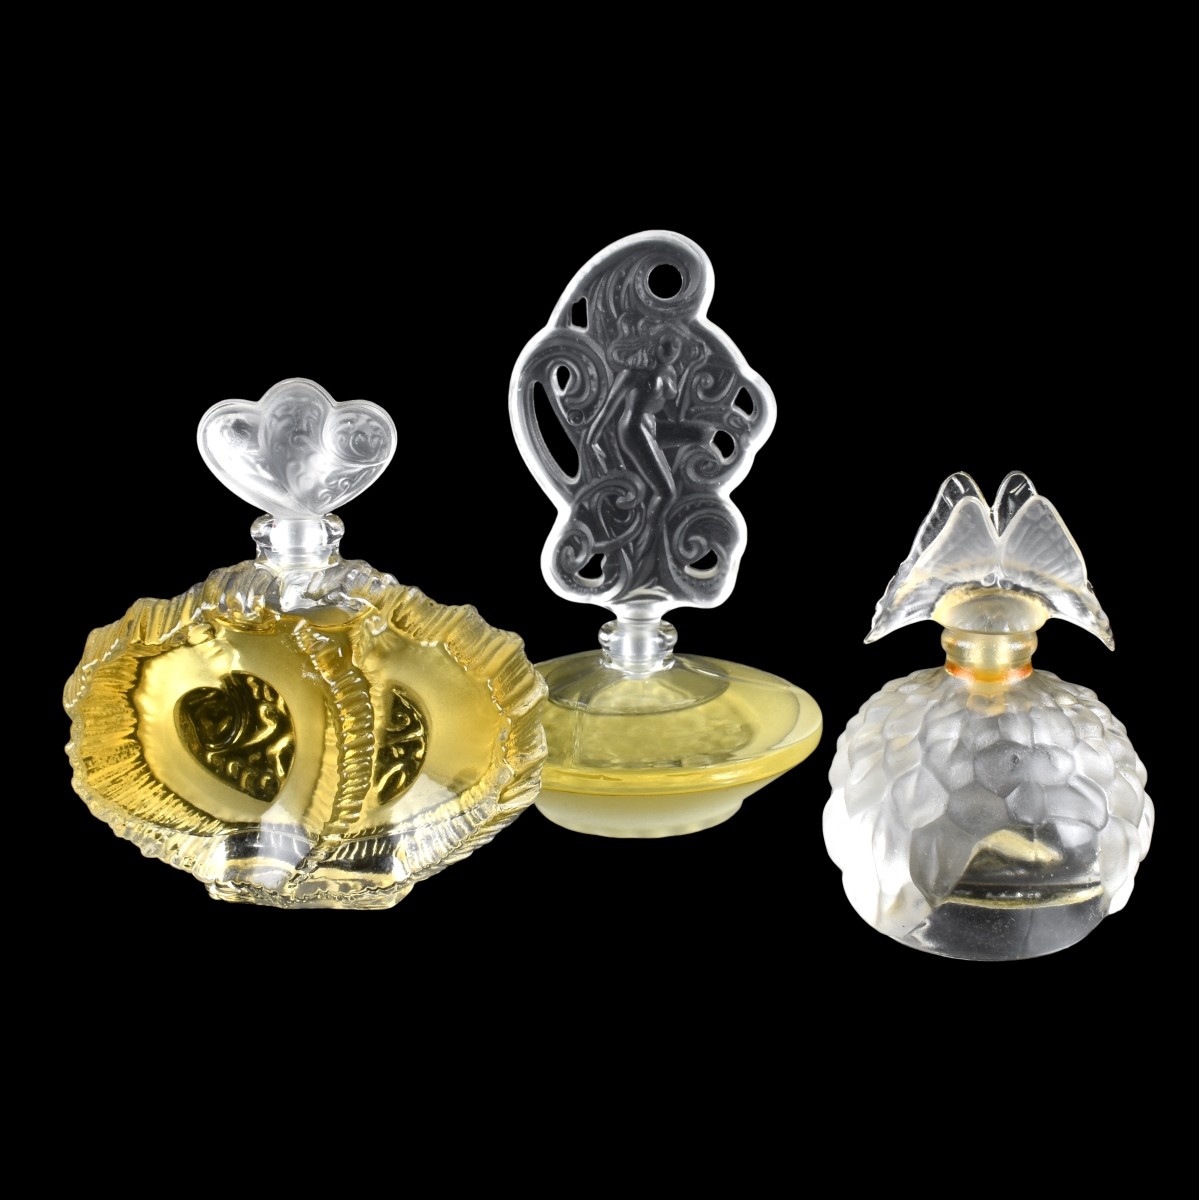 Lalique The Ultimate Collection 3 Perfume Set